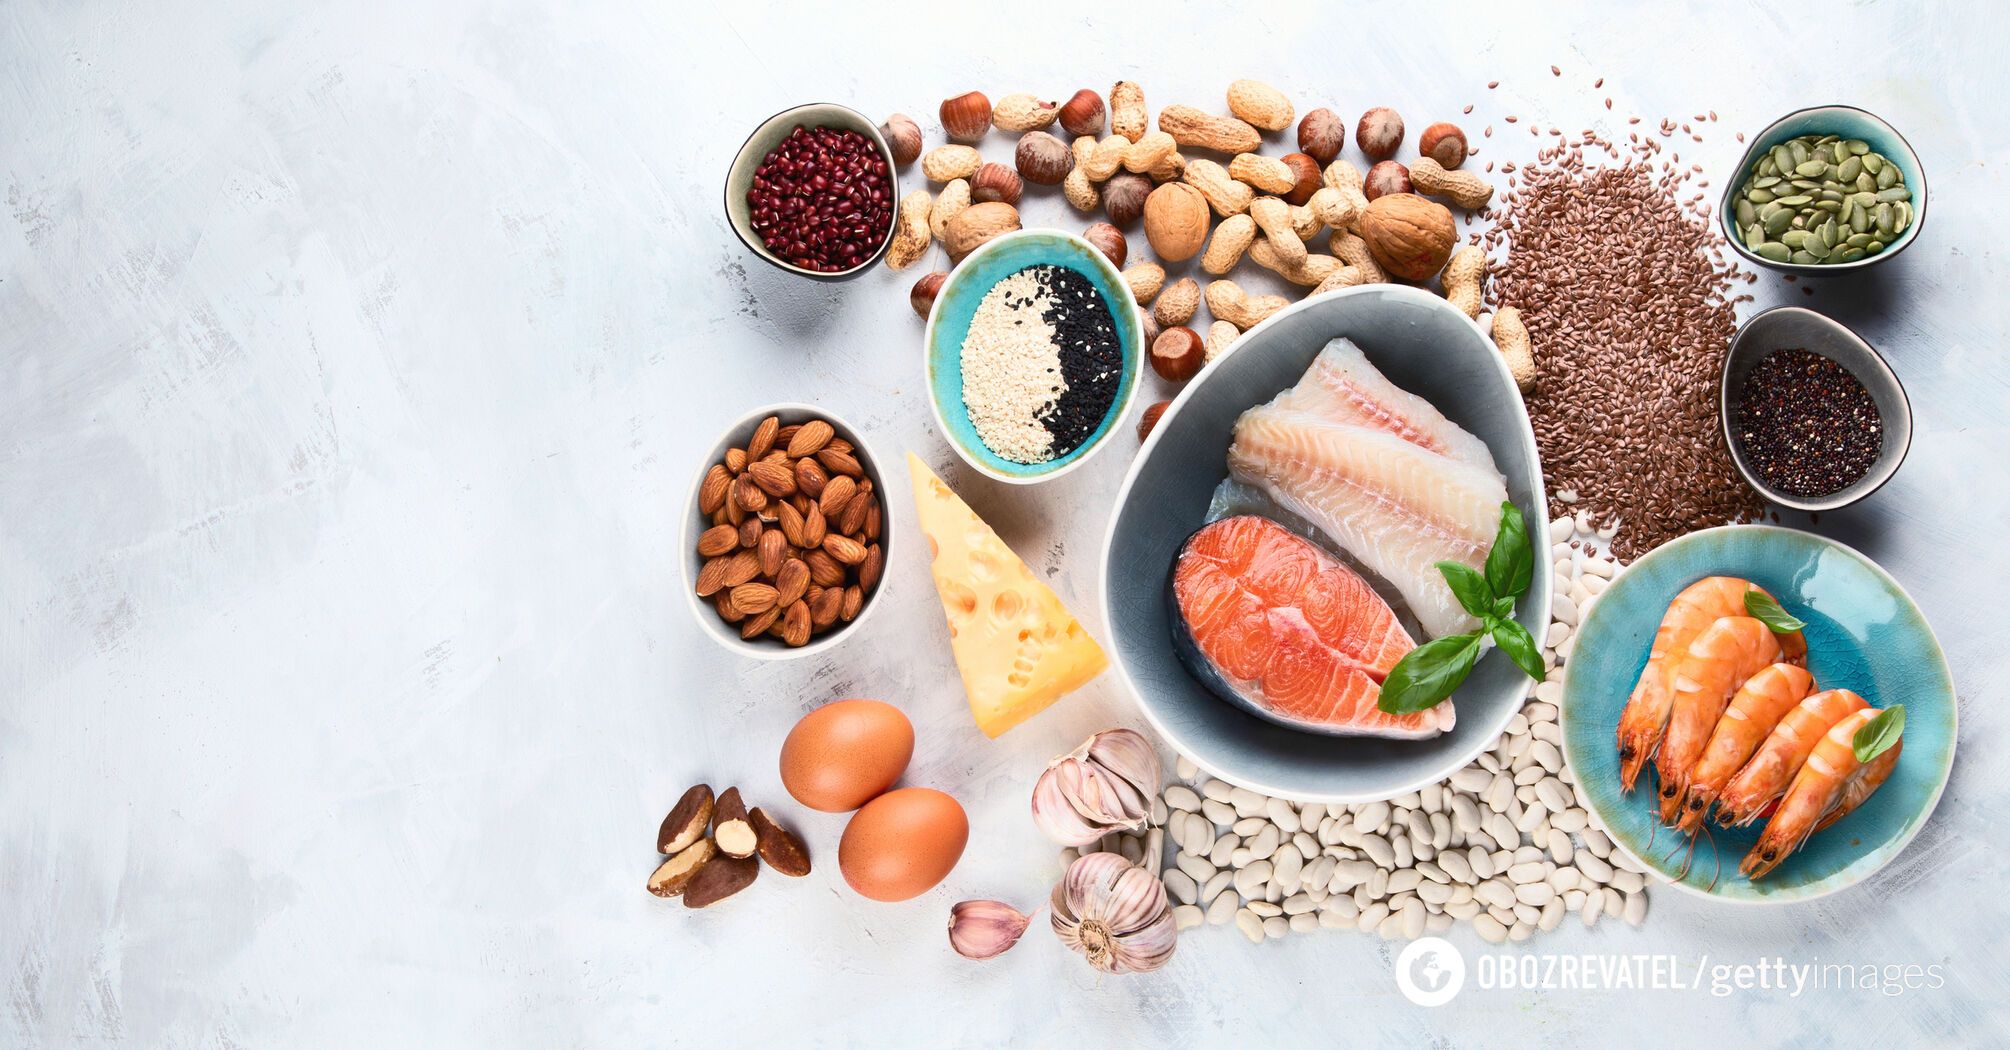 Fish, eggs, and nuts help the formation of thyroid hormones